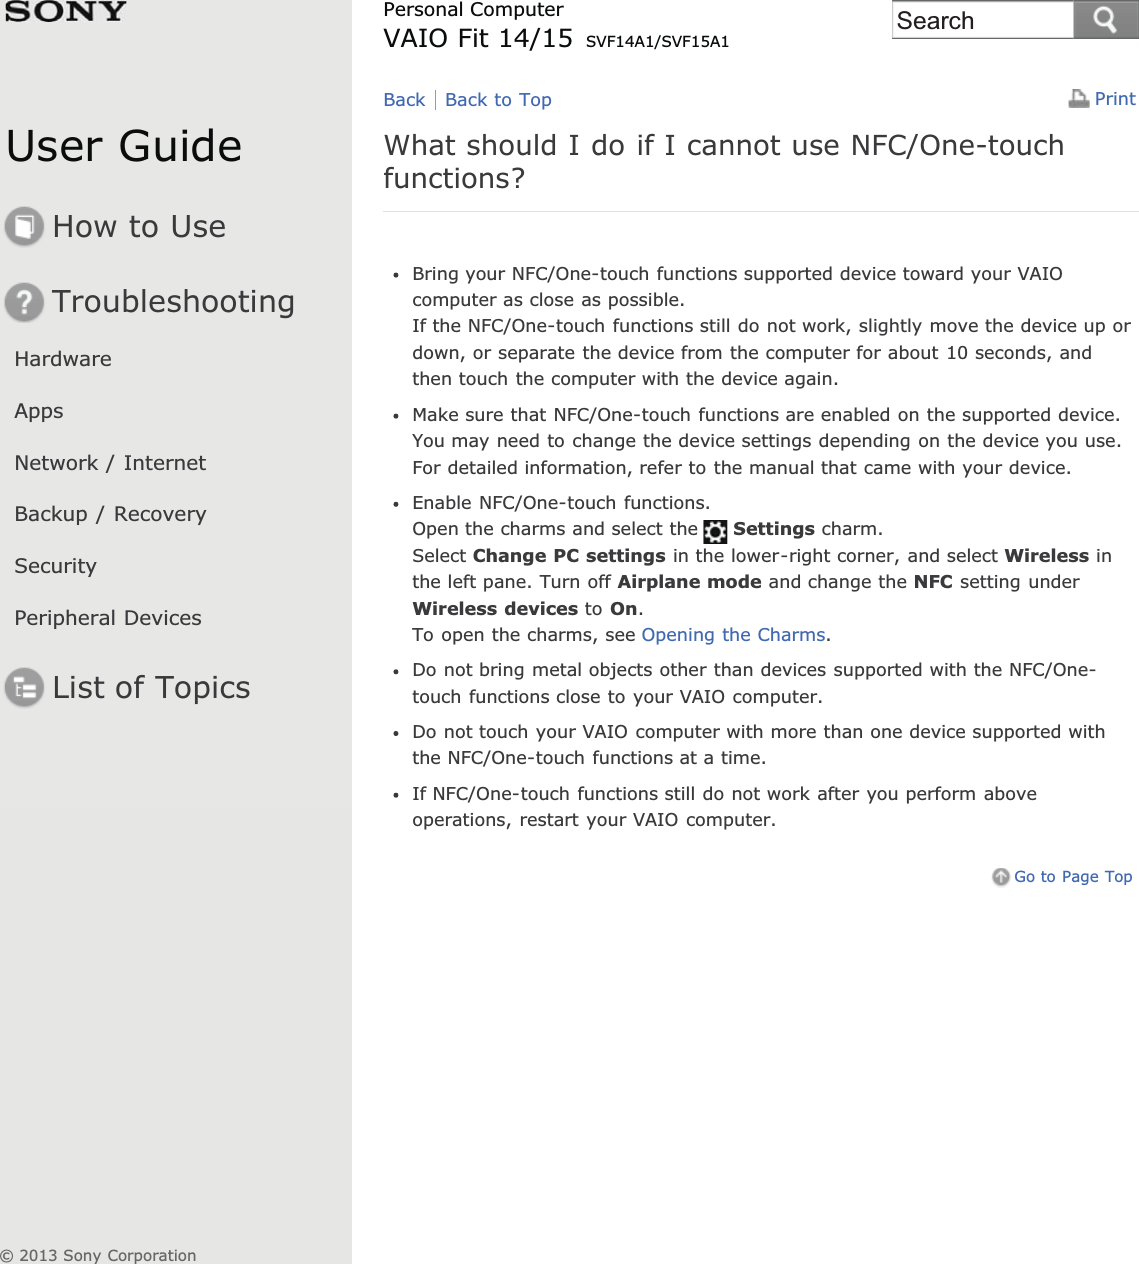 User GuideHow to UseTroubleshootingHardwareAppsNetwork / InternetBackup / RecoverySecurityPeripheral DevicesList of TopicsPrintPersonal ComputerVAIO Fit 14/15 SVF14A1/SVF15A1What should I do if I cannot use NFC/One-touchfunctions?Bring your NFC/One-touch functions supported device toward your VAIOcomputer as close as possible.If the NFC/One-touch functions still do not work, slightly move the device up ordown, or separate the device from the computer for about 10 seconds, andthen touch the computer with the device again.Make sure that NFC/One-touch functions are enabled on the supported device.You may need to change the device settings depending on the device you use.For detailed information, refer to the manual that came with your device.Enable NFC/One-touch functions.Open the charms and select the Settings charm.Select Change PC settings in the lower-right corner, and select Wireless inthe left pane. Turn off Airplane mode and change the NFC setting underWireless devices to On.To open the charms, see Opening the Charms.Do not bring metal objects other than devices supported with the NFC/One-touch functions close to your VAIO computer.Do not touch your VAIO computer with more than one device supported withthe NFC/One-touch functions at a time.If NFC/One-touch functions still do not work after you perform aboveoperations, restart your VAIO computer.Go to Page TopBack Back to Top© 2013 Sony CorporationSearch